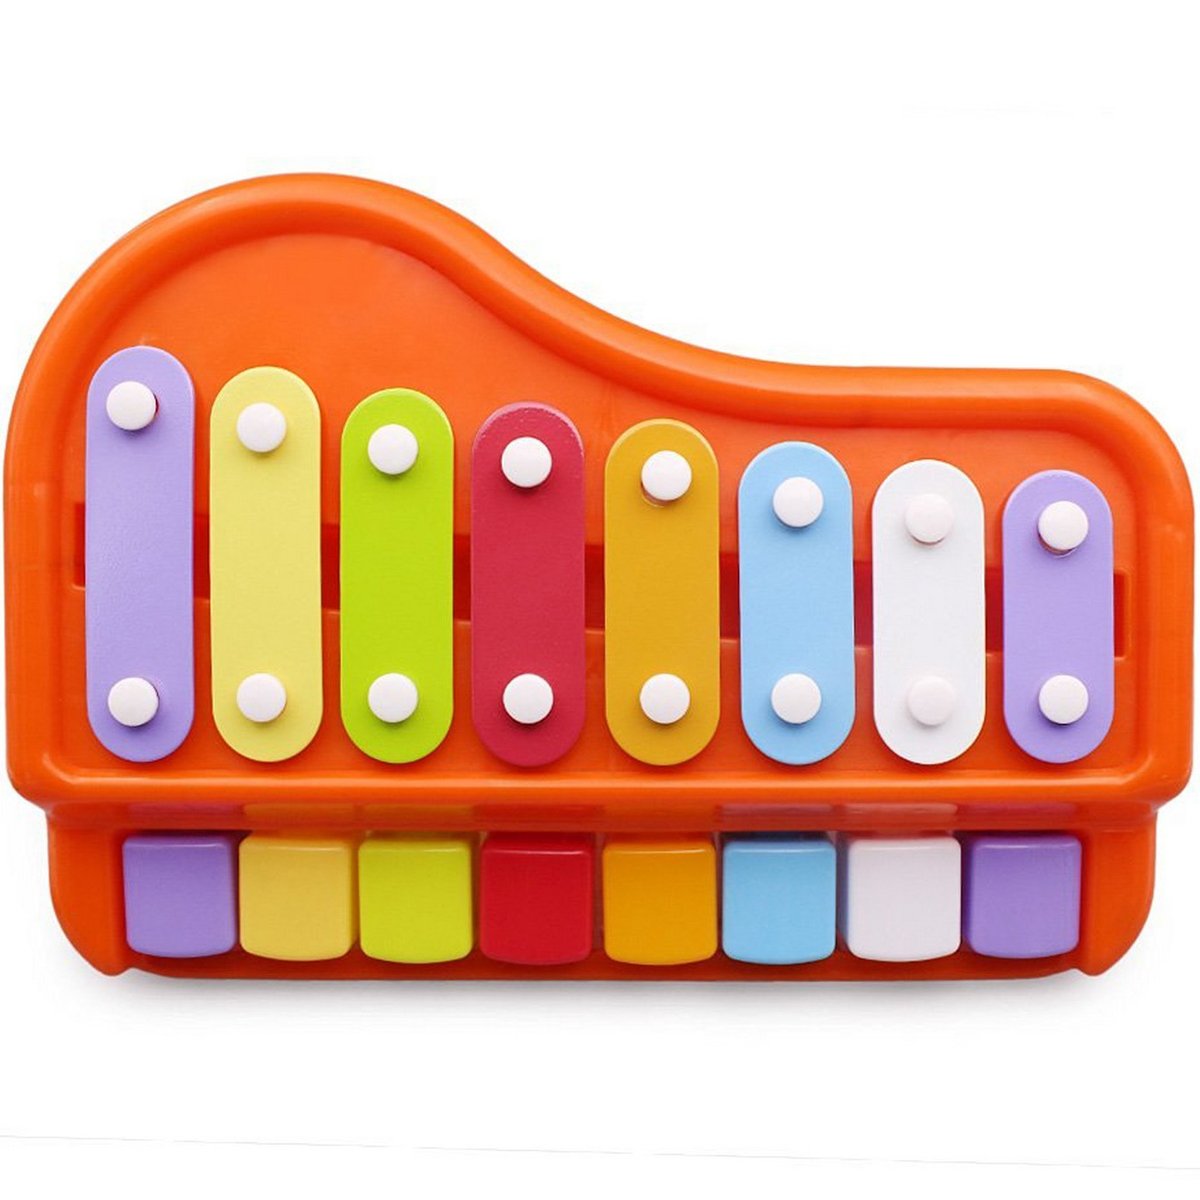 Skid Fusion Xylophone Musical Instrument Toy